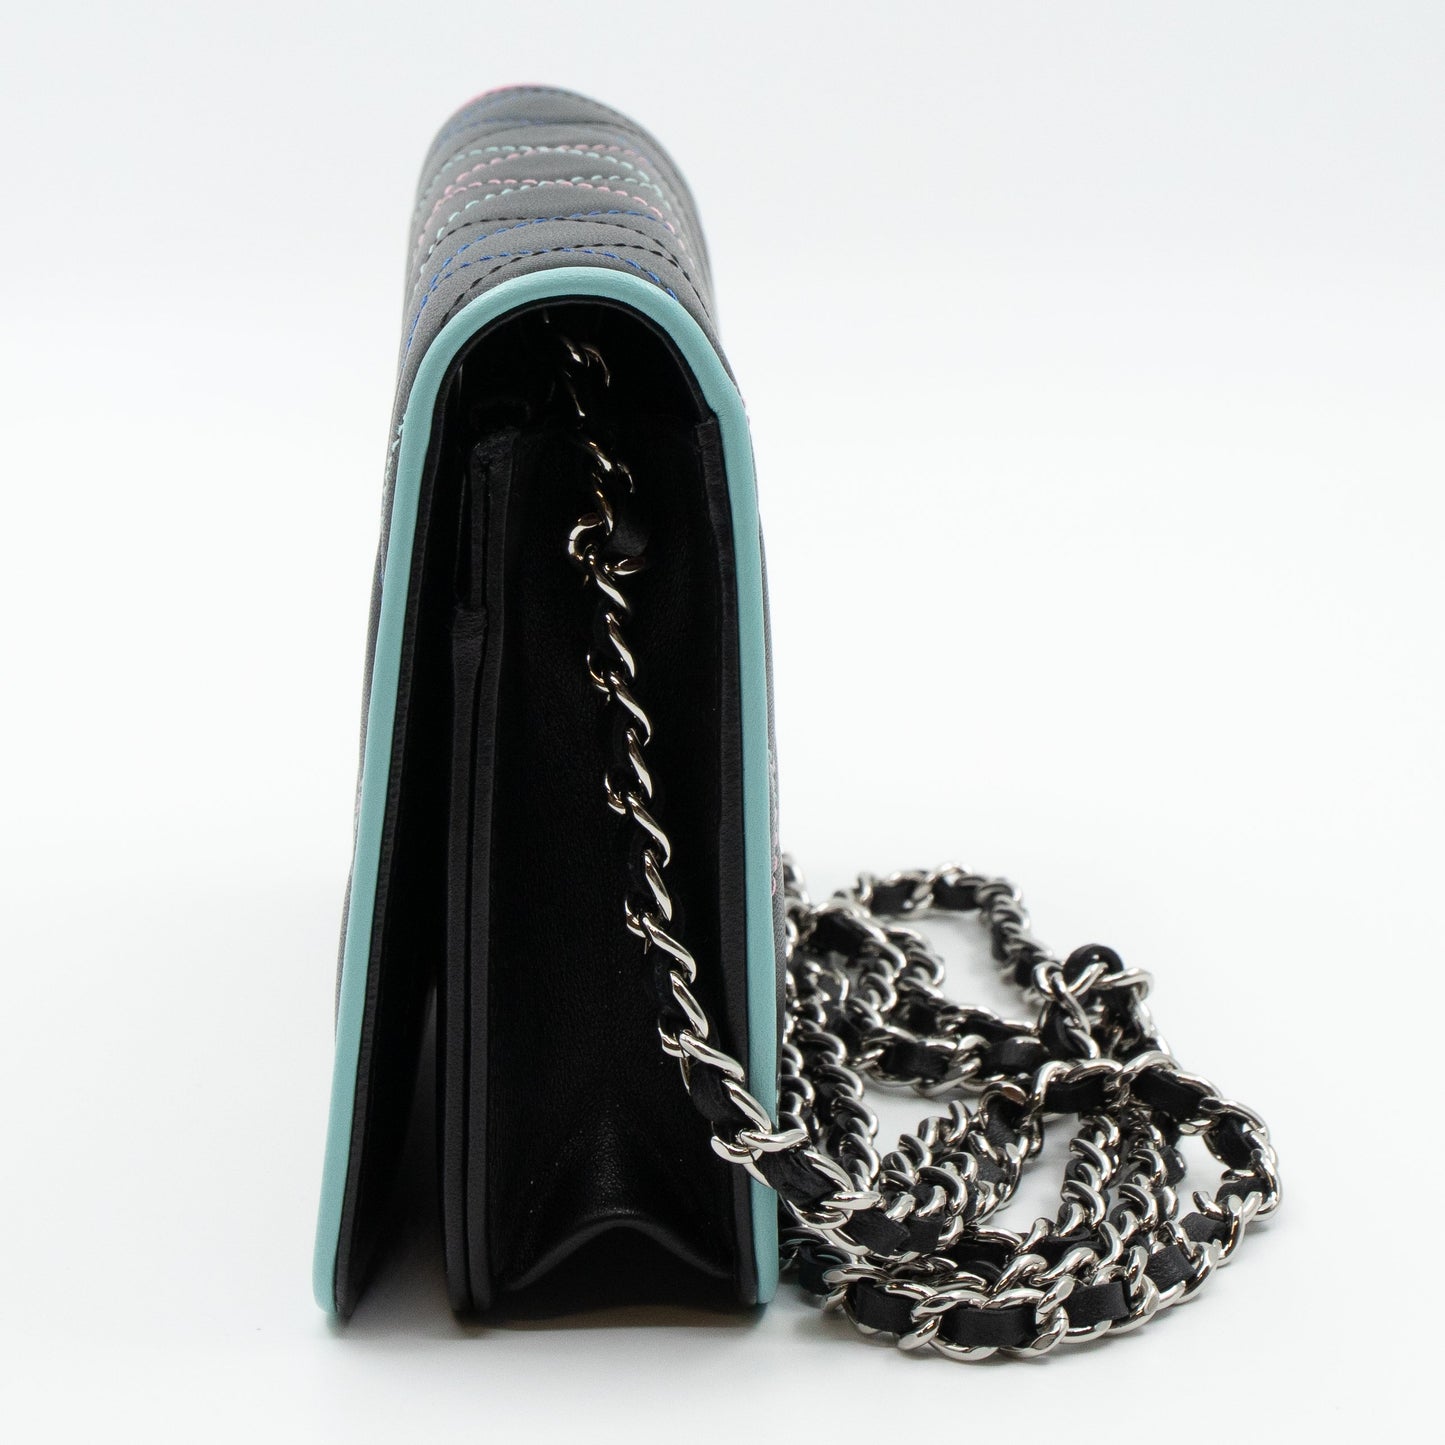 Classic Wallet On Chain Black Pastel Leather